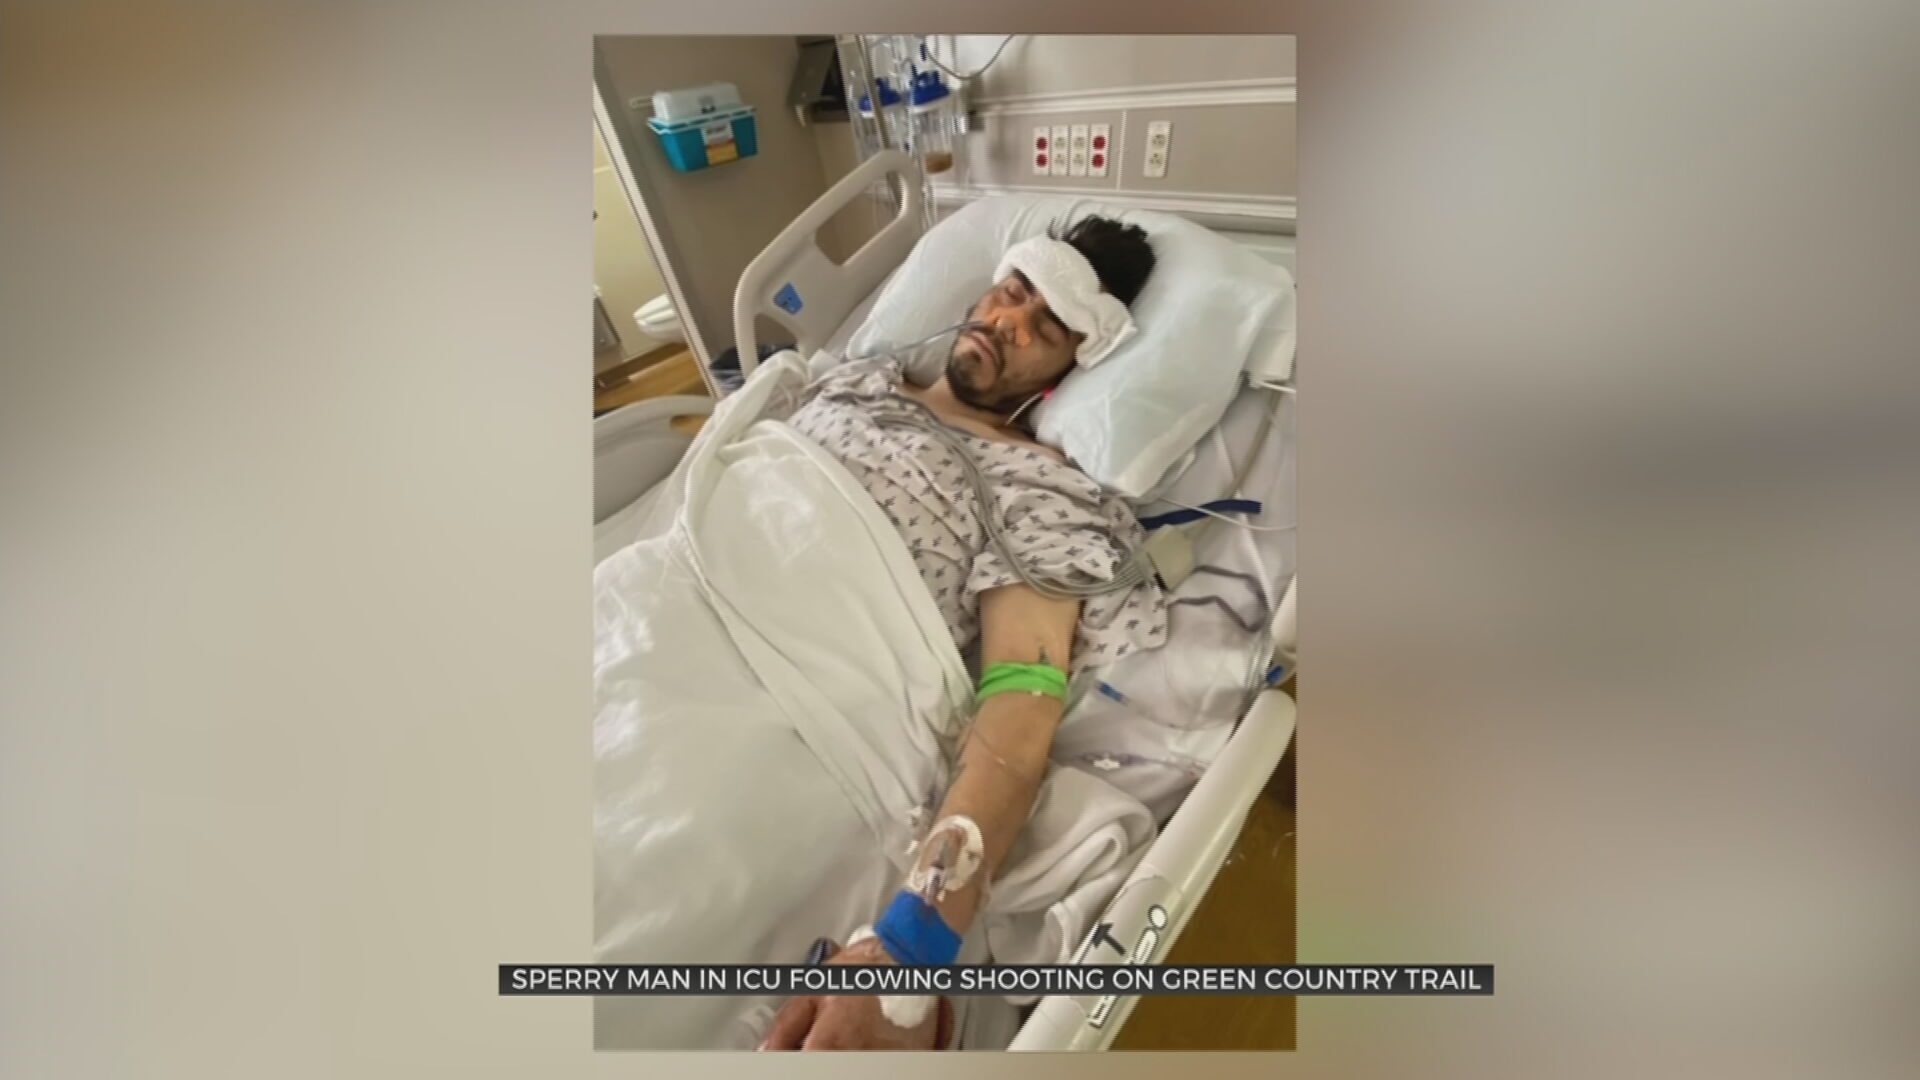 Sperry Man In ICU After Being Shot Several Times On Walking Trail 